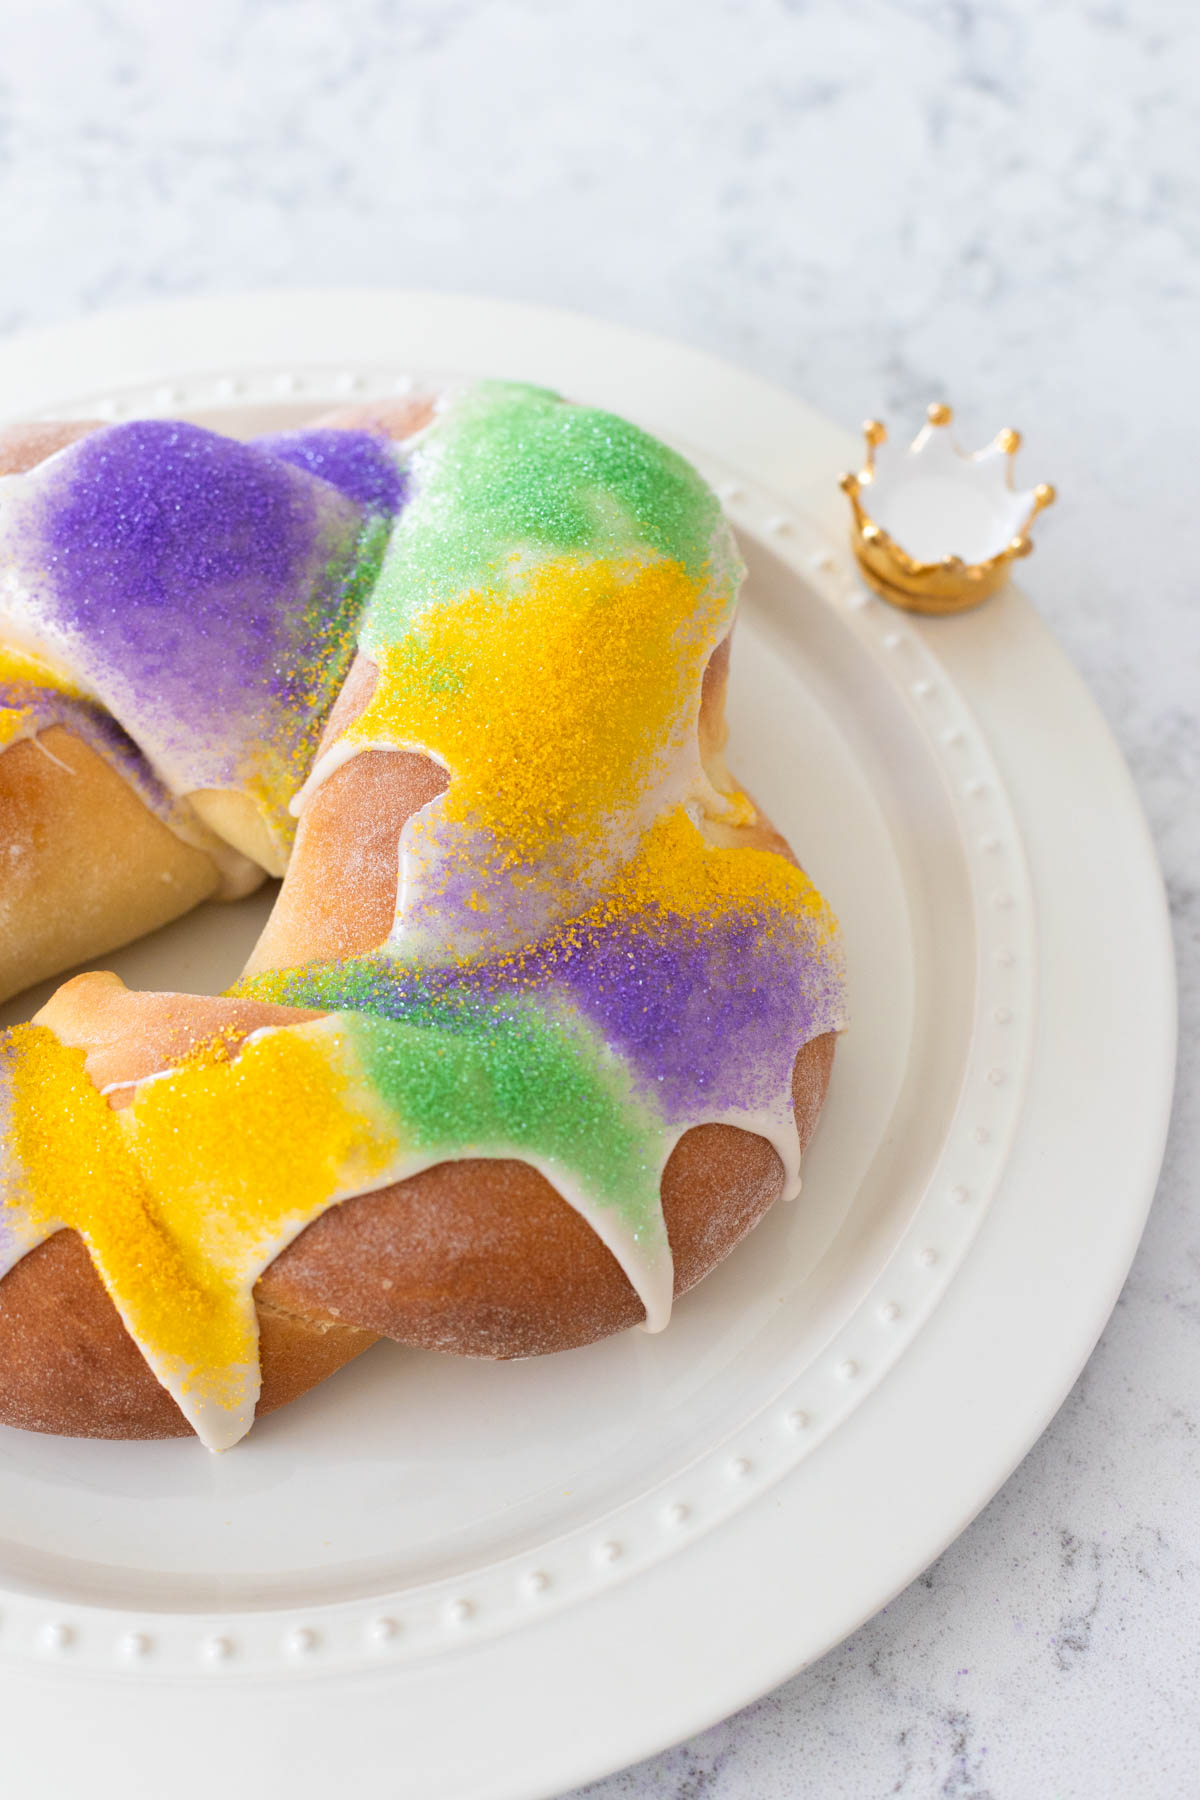 The finished king cake is on a platter with a crown decoration. The top is decorated with purple, green, and yellow sprinkles.